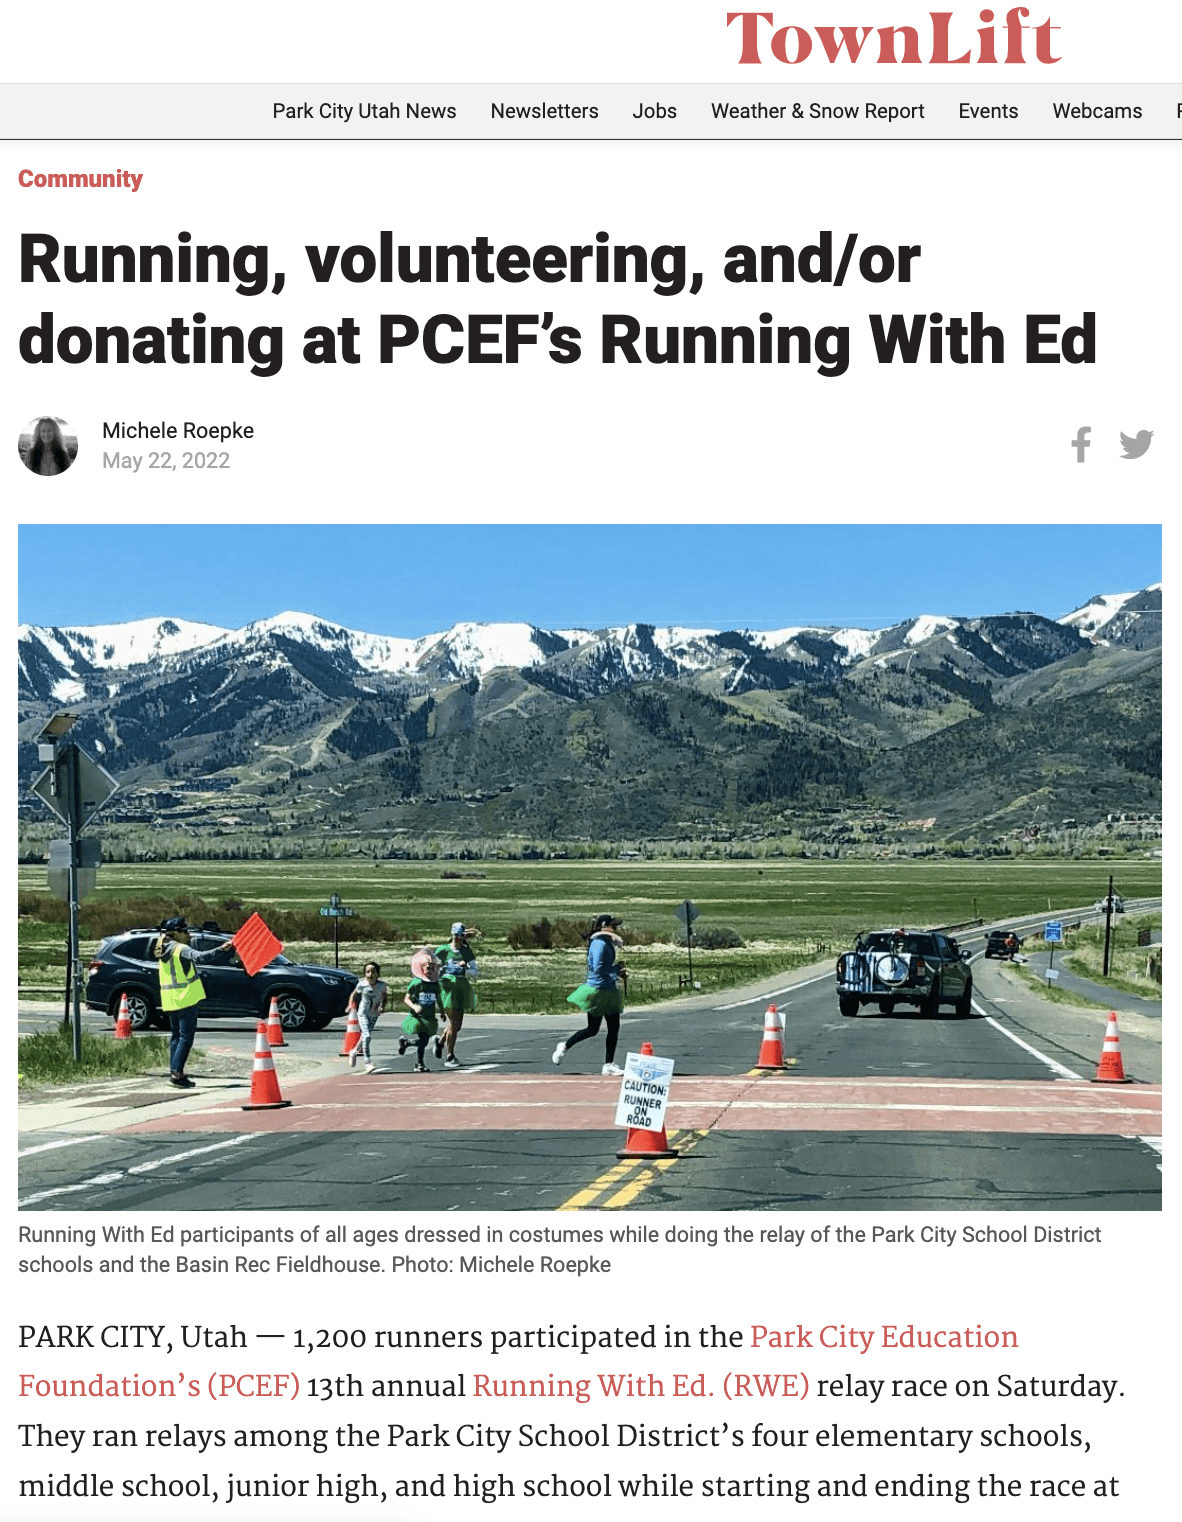 Running, Volunteering, and/or Donating at PCEF’s Running With Ed